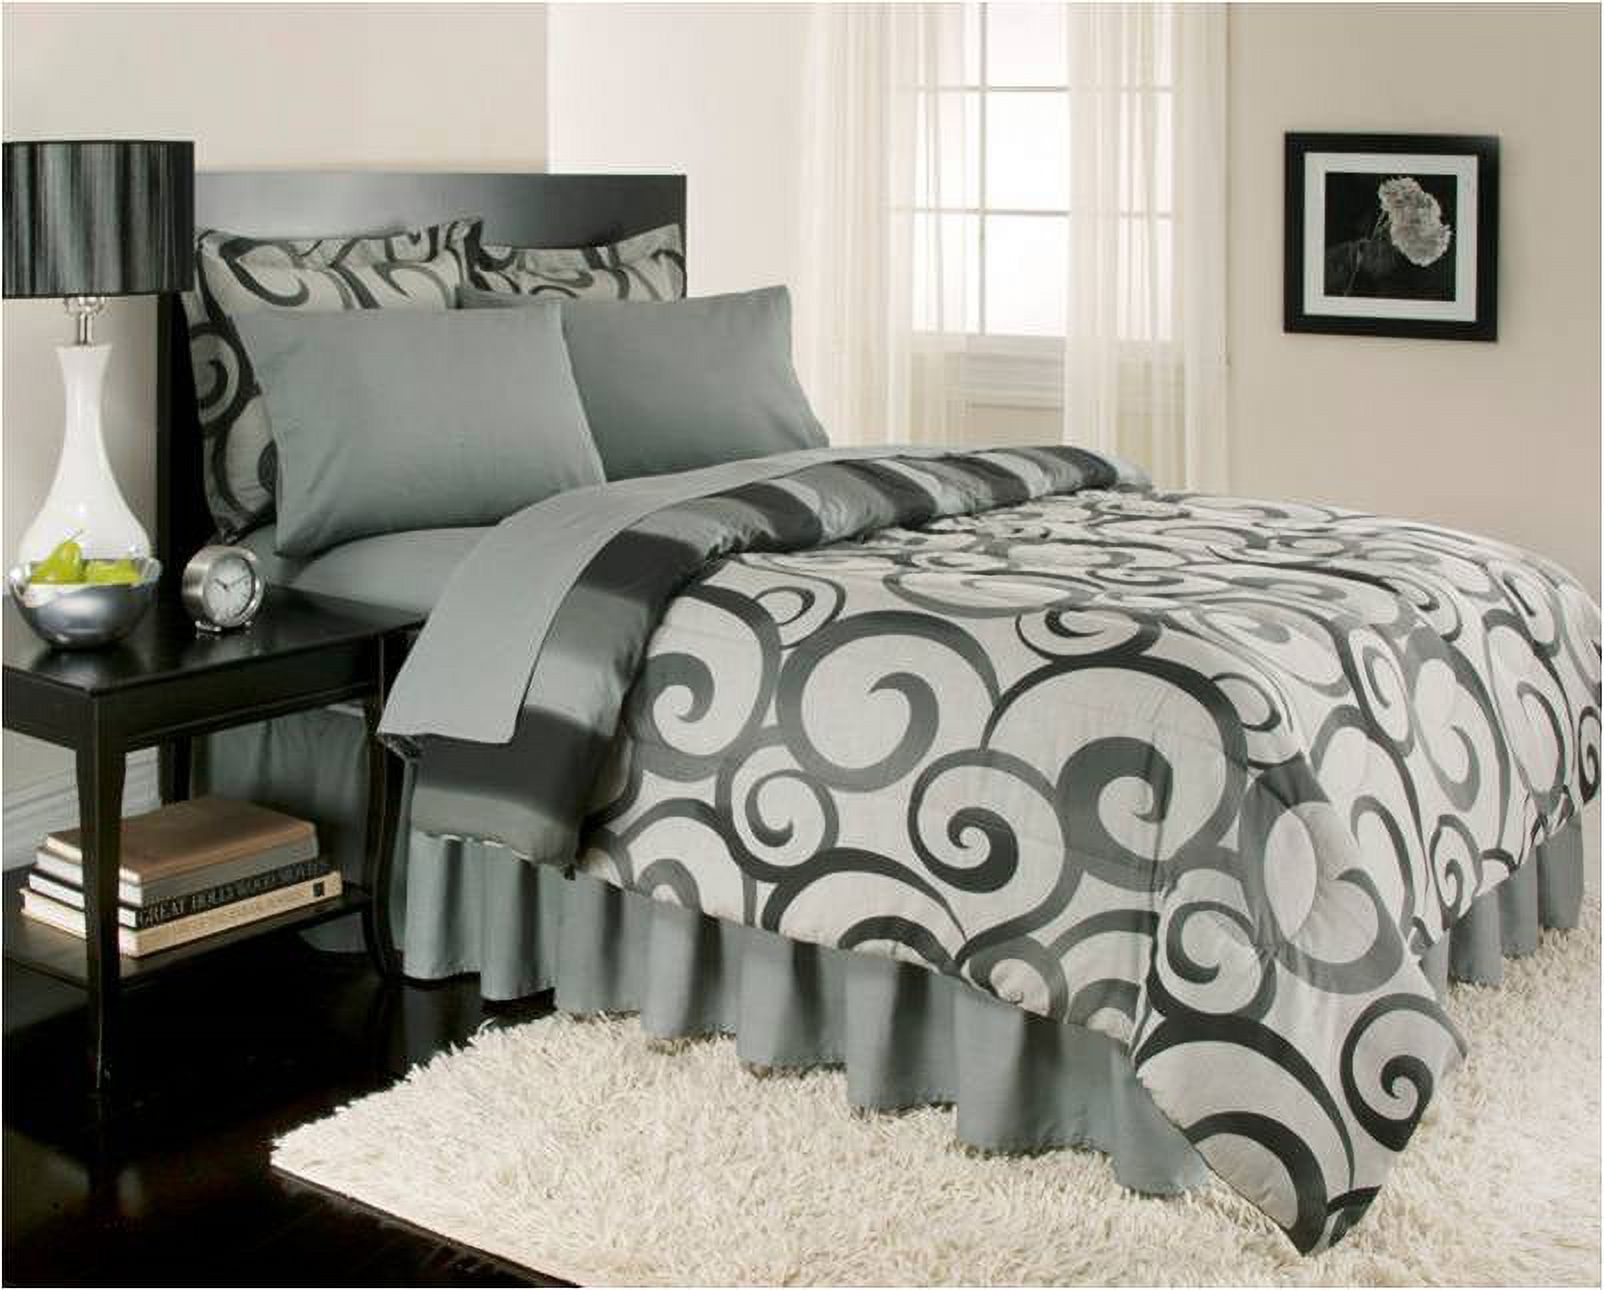 Sloane Street Alessandro Scroll, Reversible, Complete Set With Bonus Bed Skirt By Royale Linens - image 2 of 3